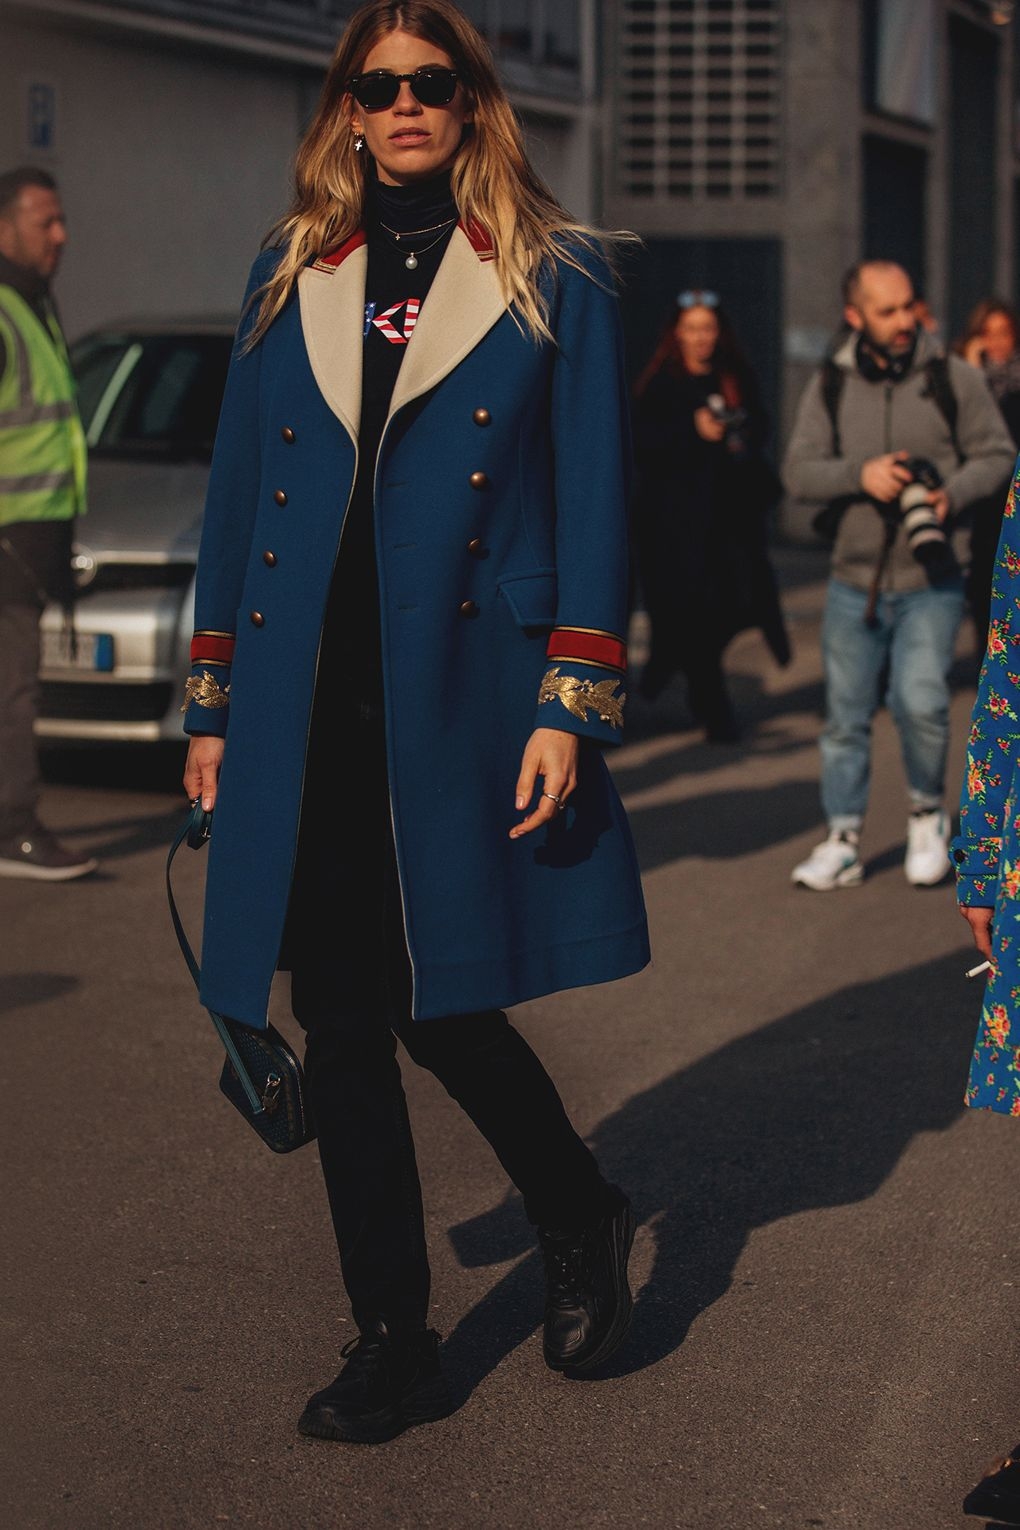 See All The Stylish Fashionistas At The Milan Fashion Week